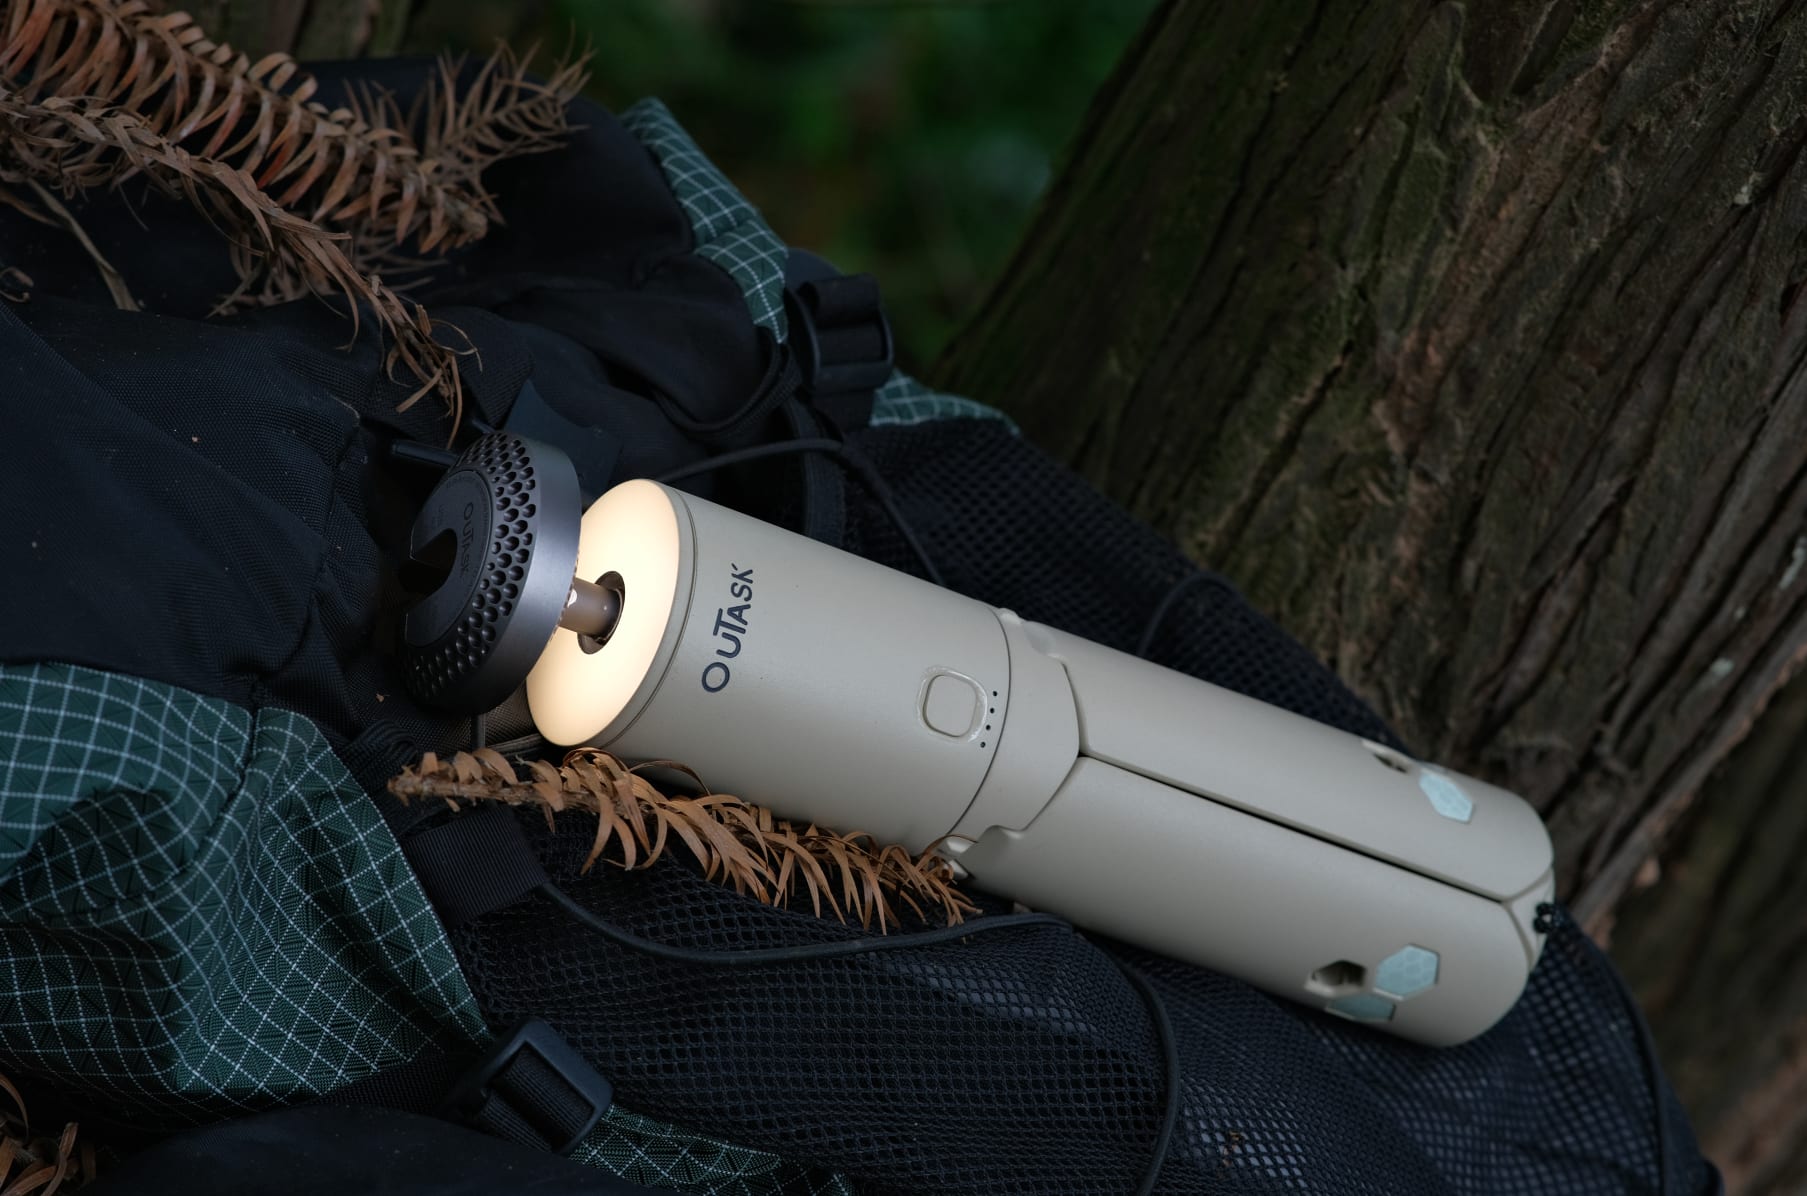 OUTASK Telescopic Lantern by CosyCamp, austock